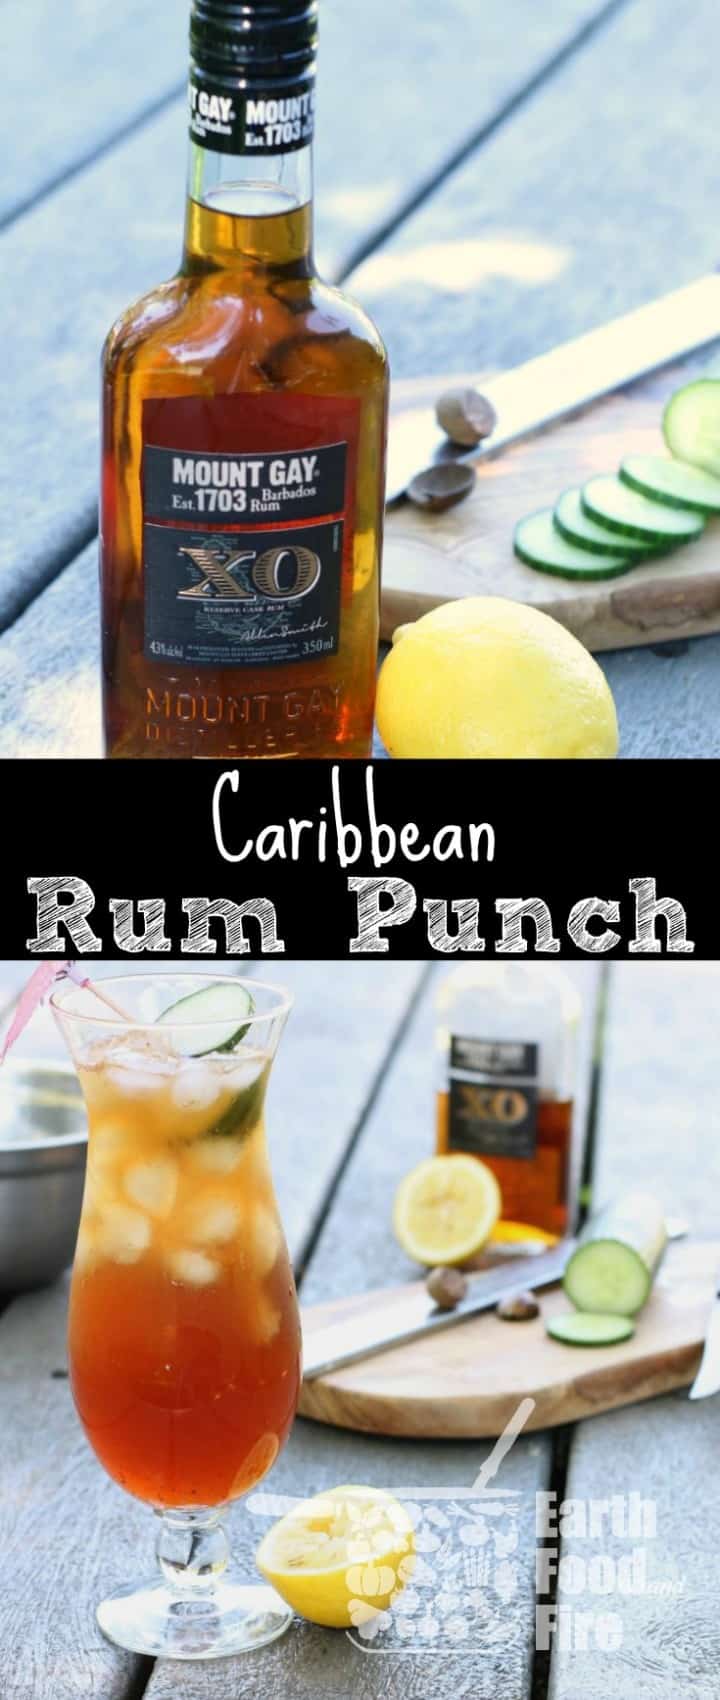 This Caribbean Rum Punch recipe is easy to make and requires no special skills. Whip this cocktail up for Canada Day or any summer party!